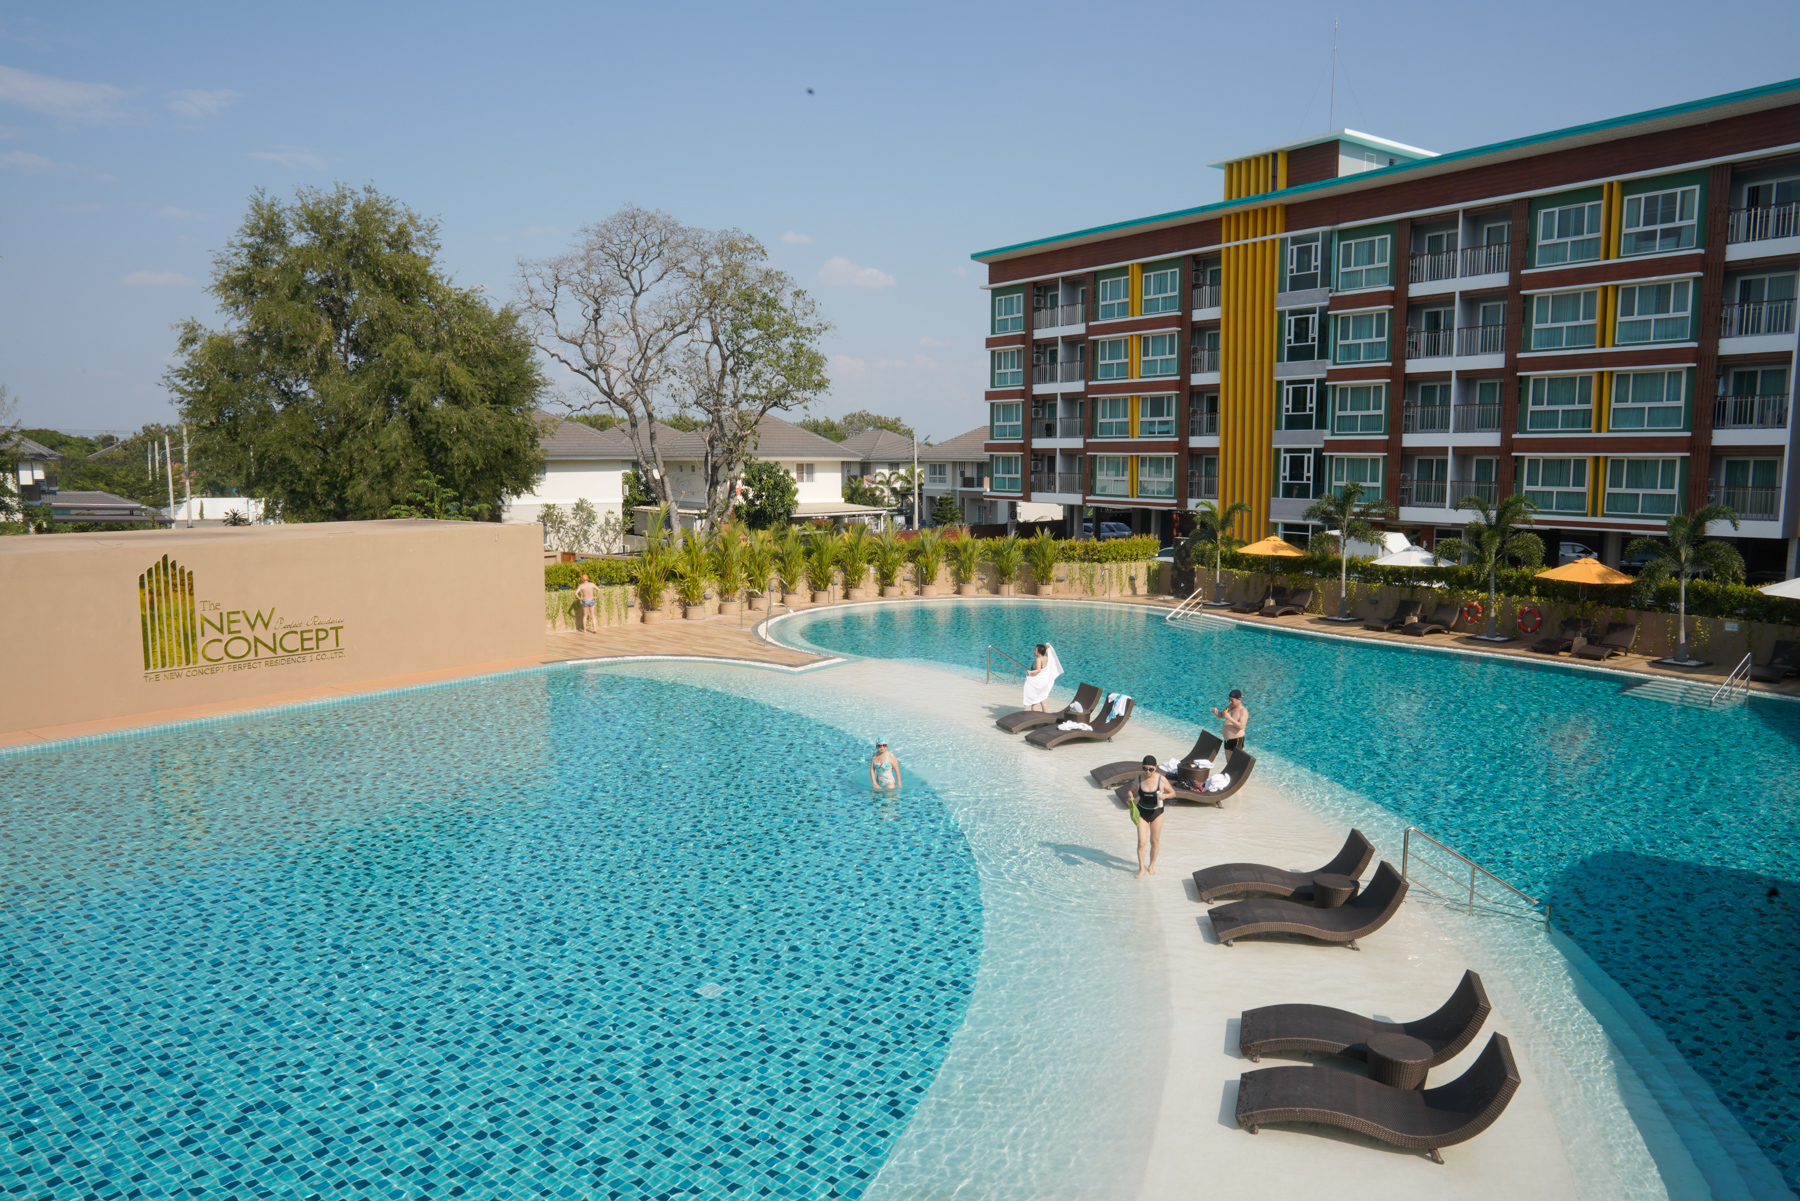 Chinese tourists swim at a hotel-style apartment complex in Chiang Mai, January 18, 2019. Besides pursuing an education in the country, a growing number of Chinese are going to Thailand for travel and to purchase real estate. Thai law limits foreign ownership to 49 percent of the units in a given condominium complex. 30 percent of the apartments in the complex pictured are owned by Chinese citizens, according to An Lan, who owns three units in it.  